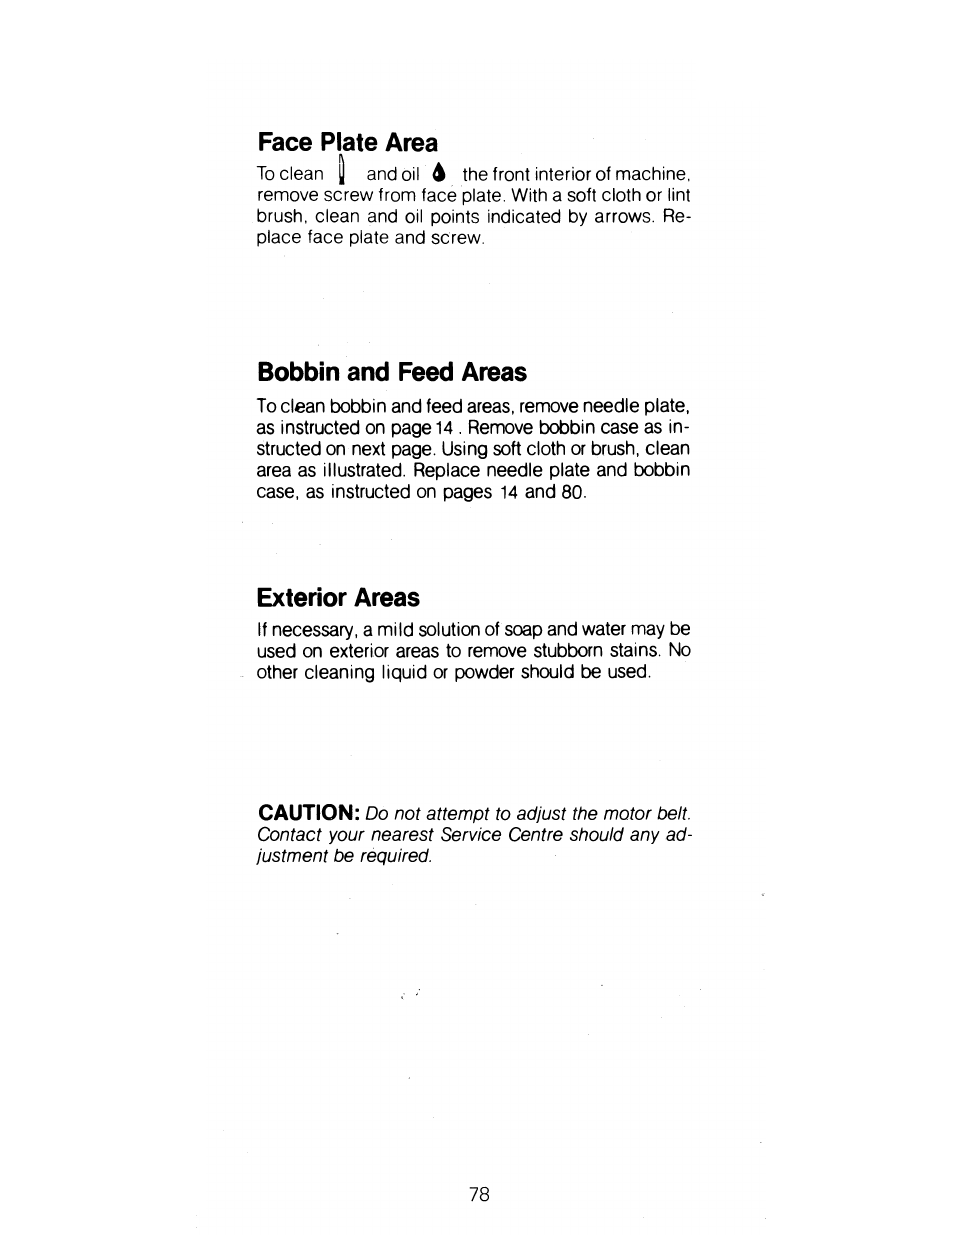 Face plate area, Bobbin and feed areas, Exterior areas | SINGER 1288 User Manual | Page 79 / 89